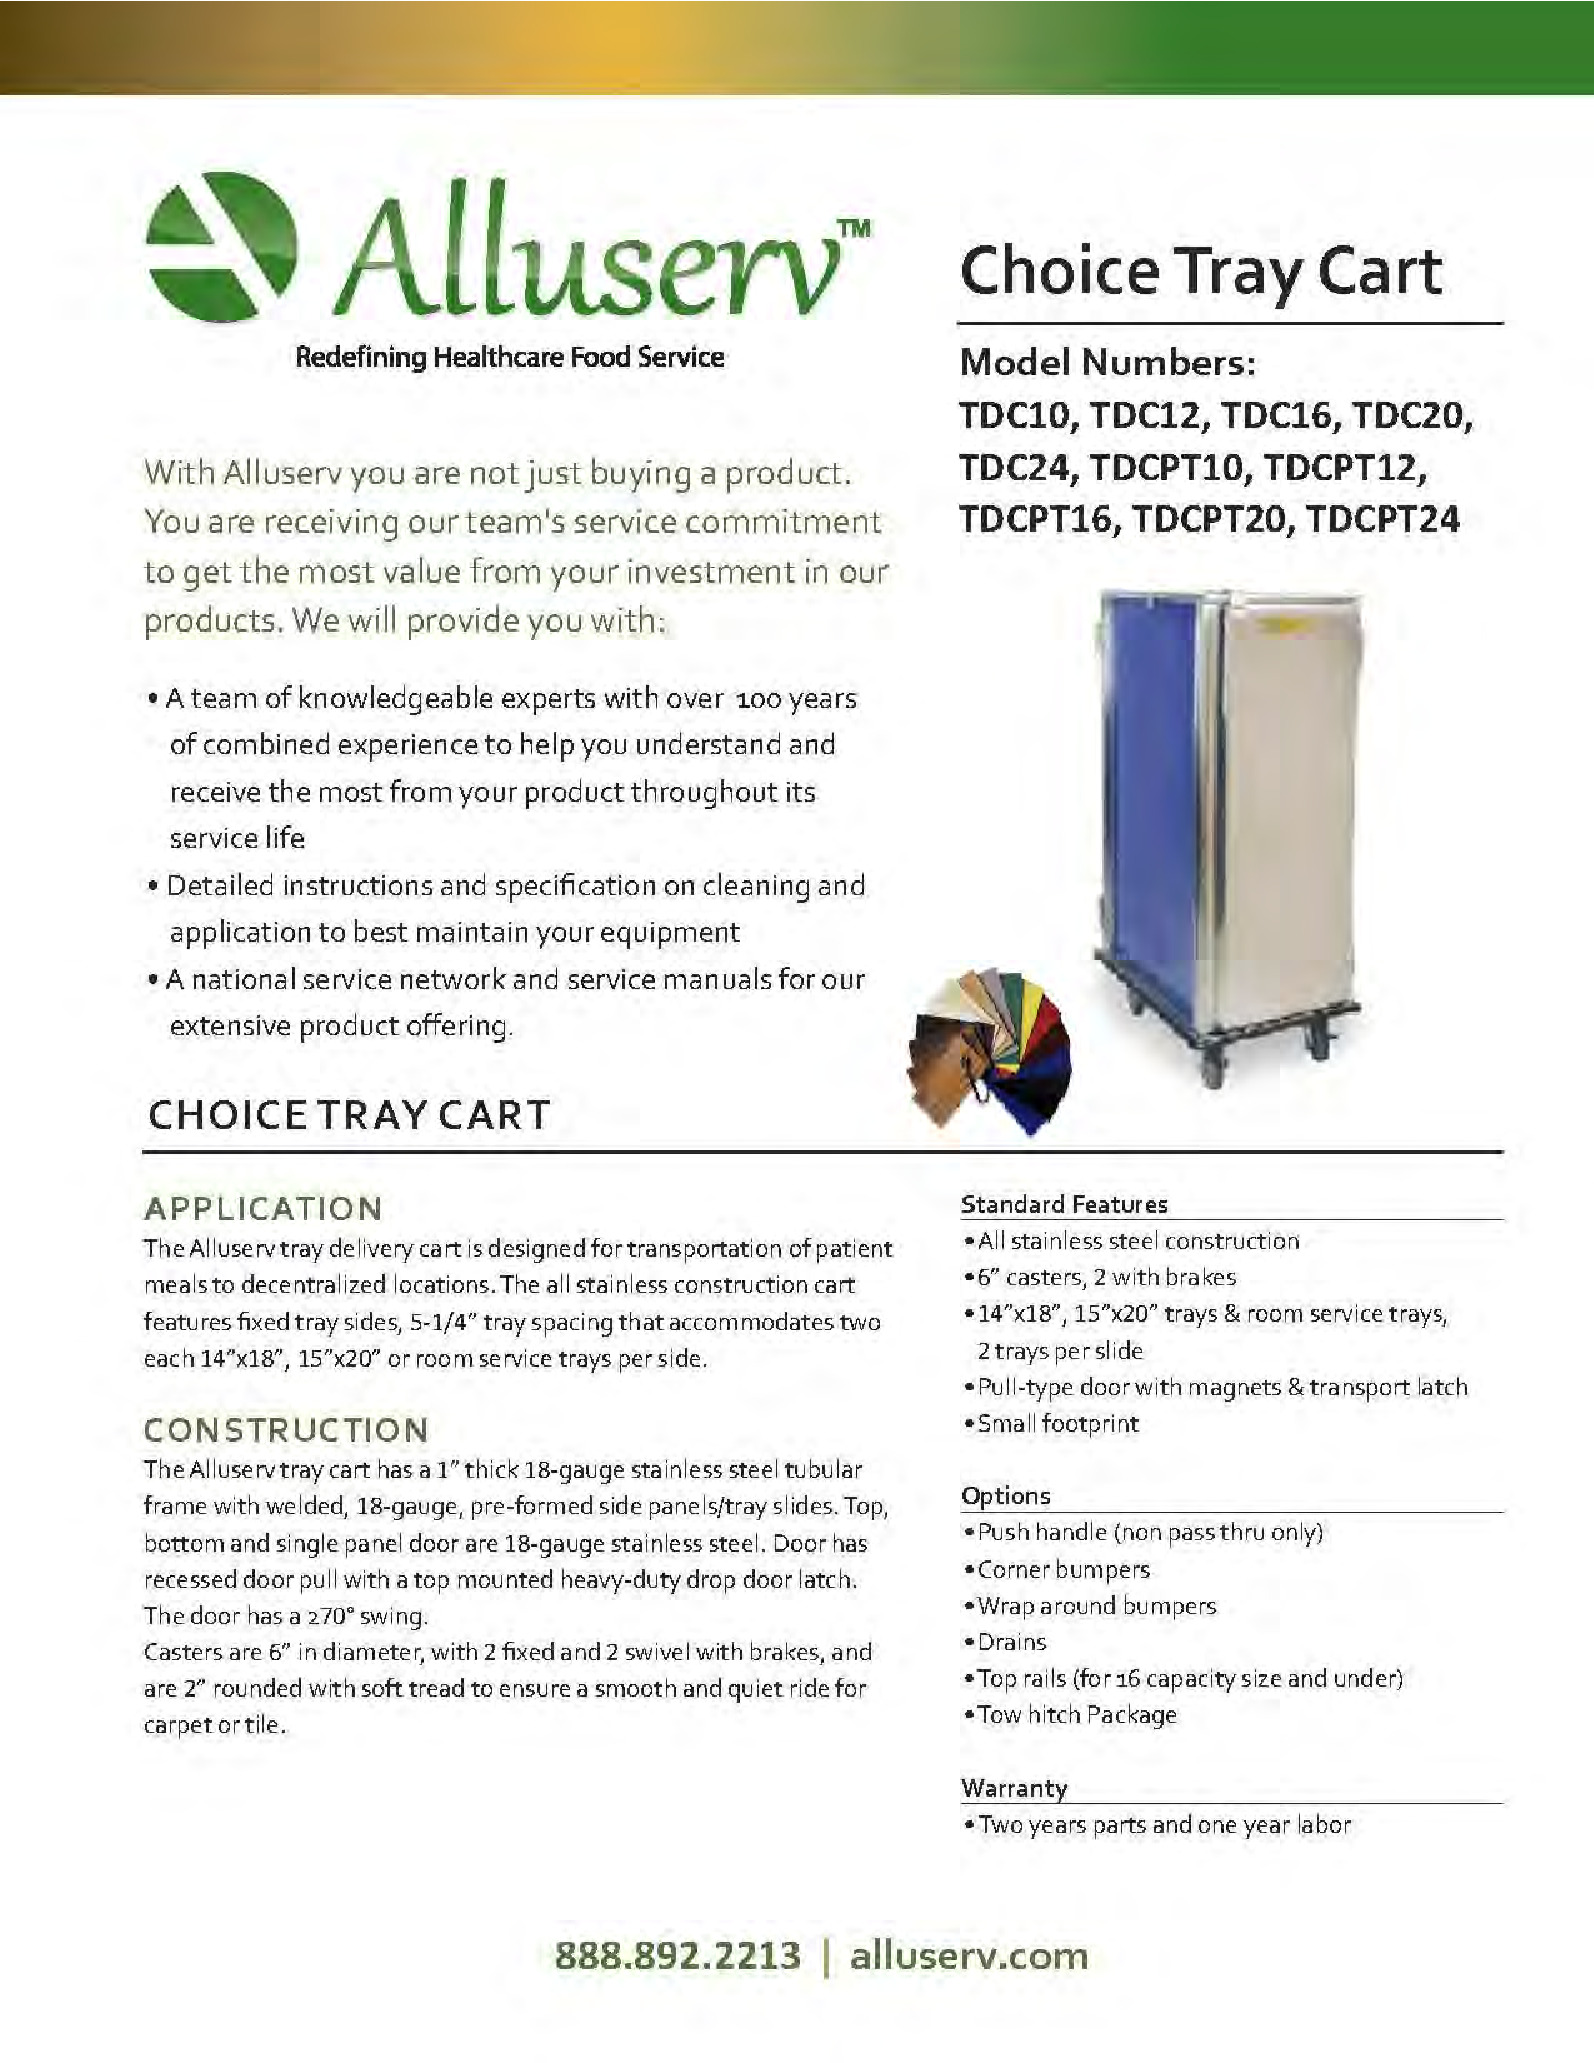 Alluserv TDC24 Meal Tray Delivery Cabinet